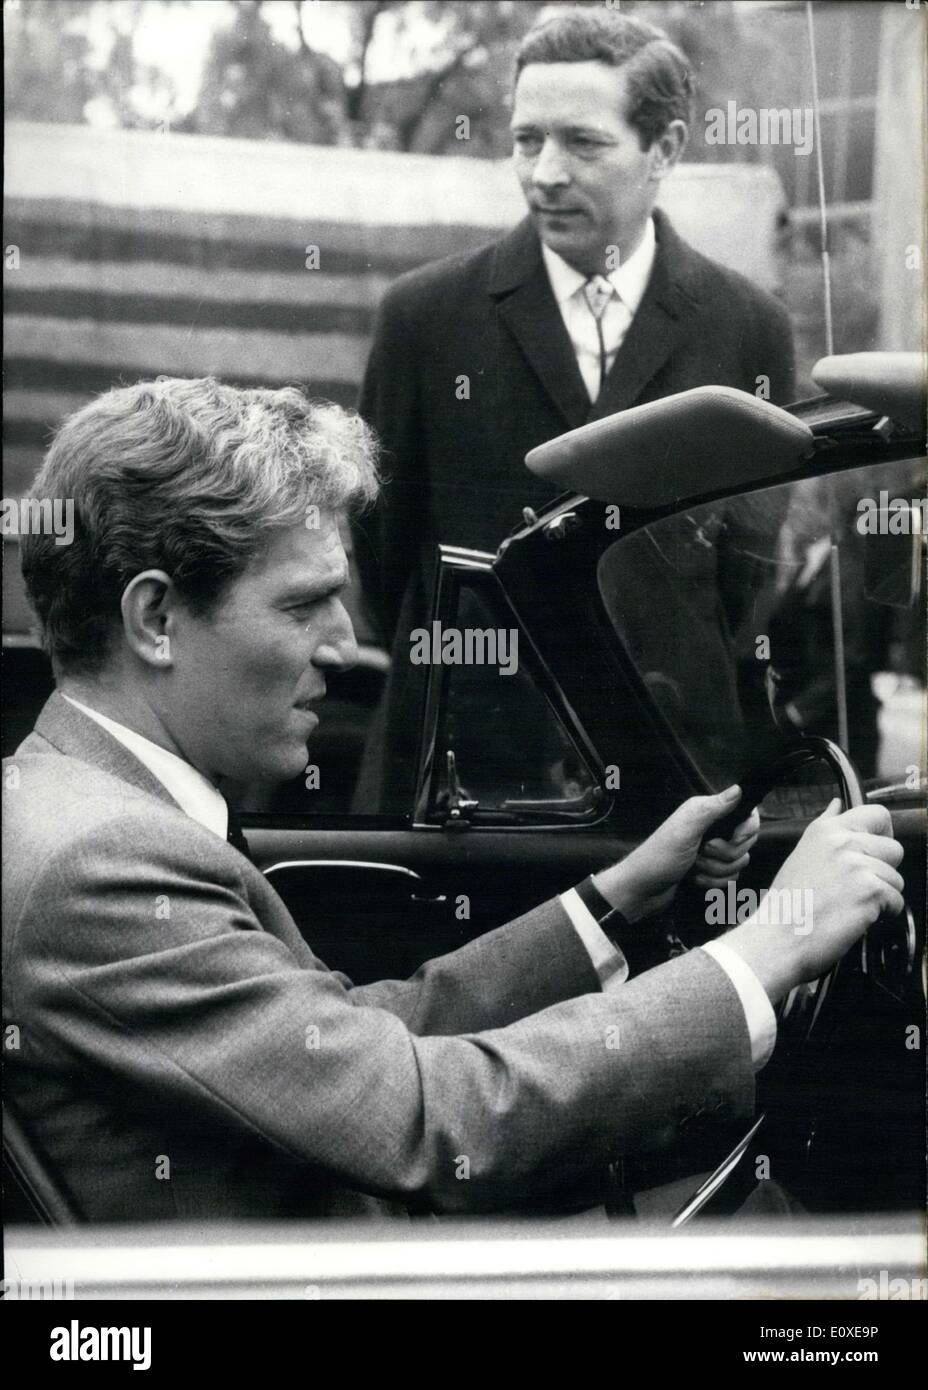 May 11, 1966 - Pictured is George Segal(in the car) during a scene from the movie ''The Quiller Memorandum,'' which filmed in Berlin. Other actors in the movie include Sir Alec Guinness and Senta Berger. Stock Photo